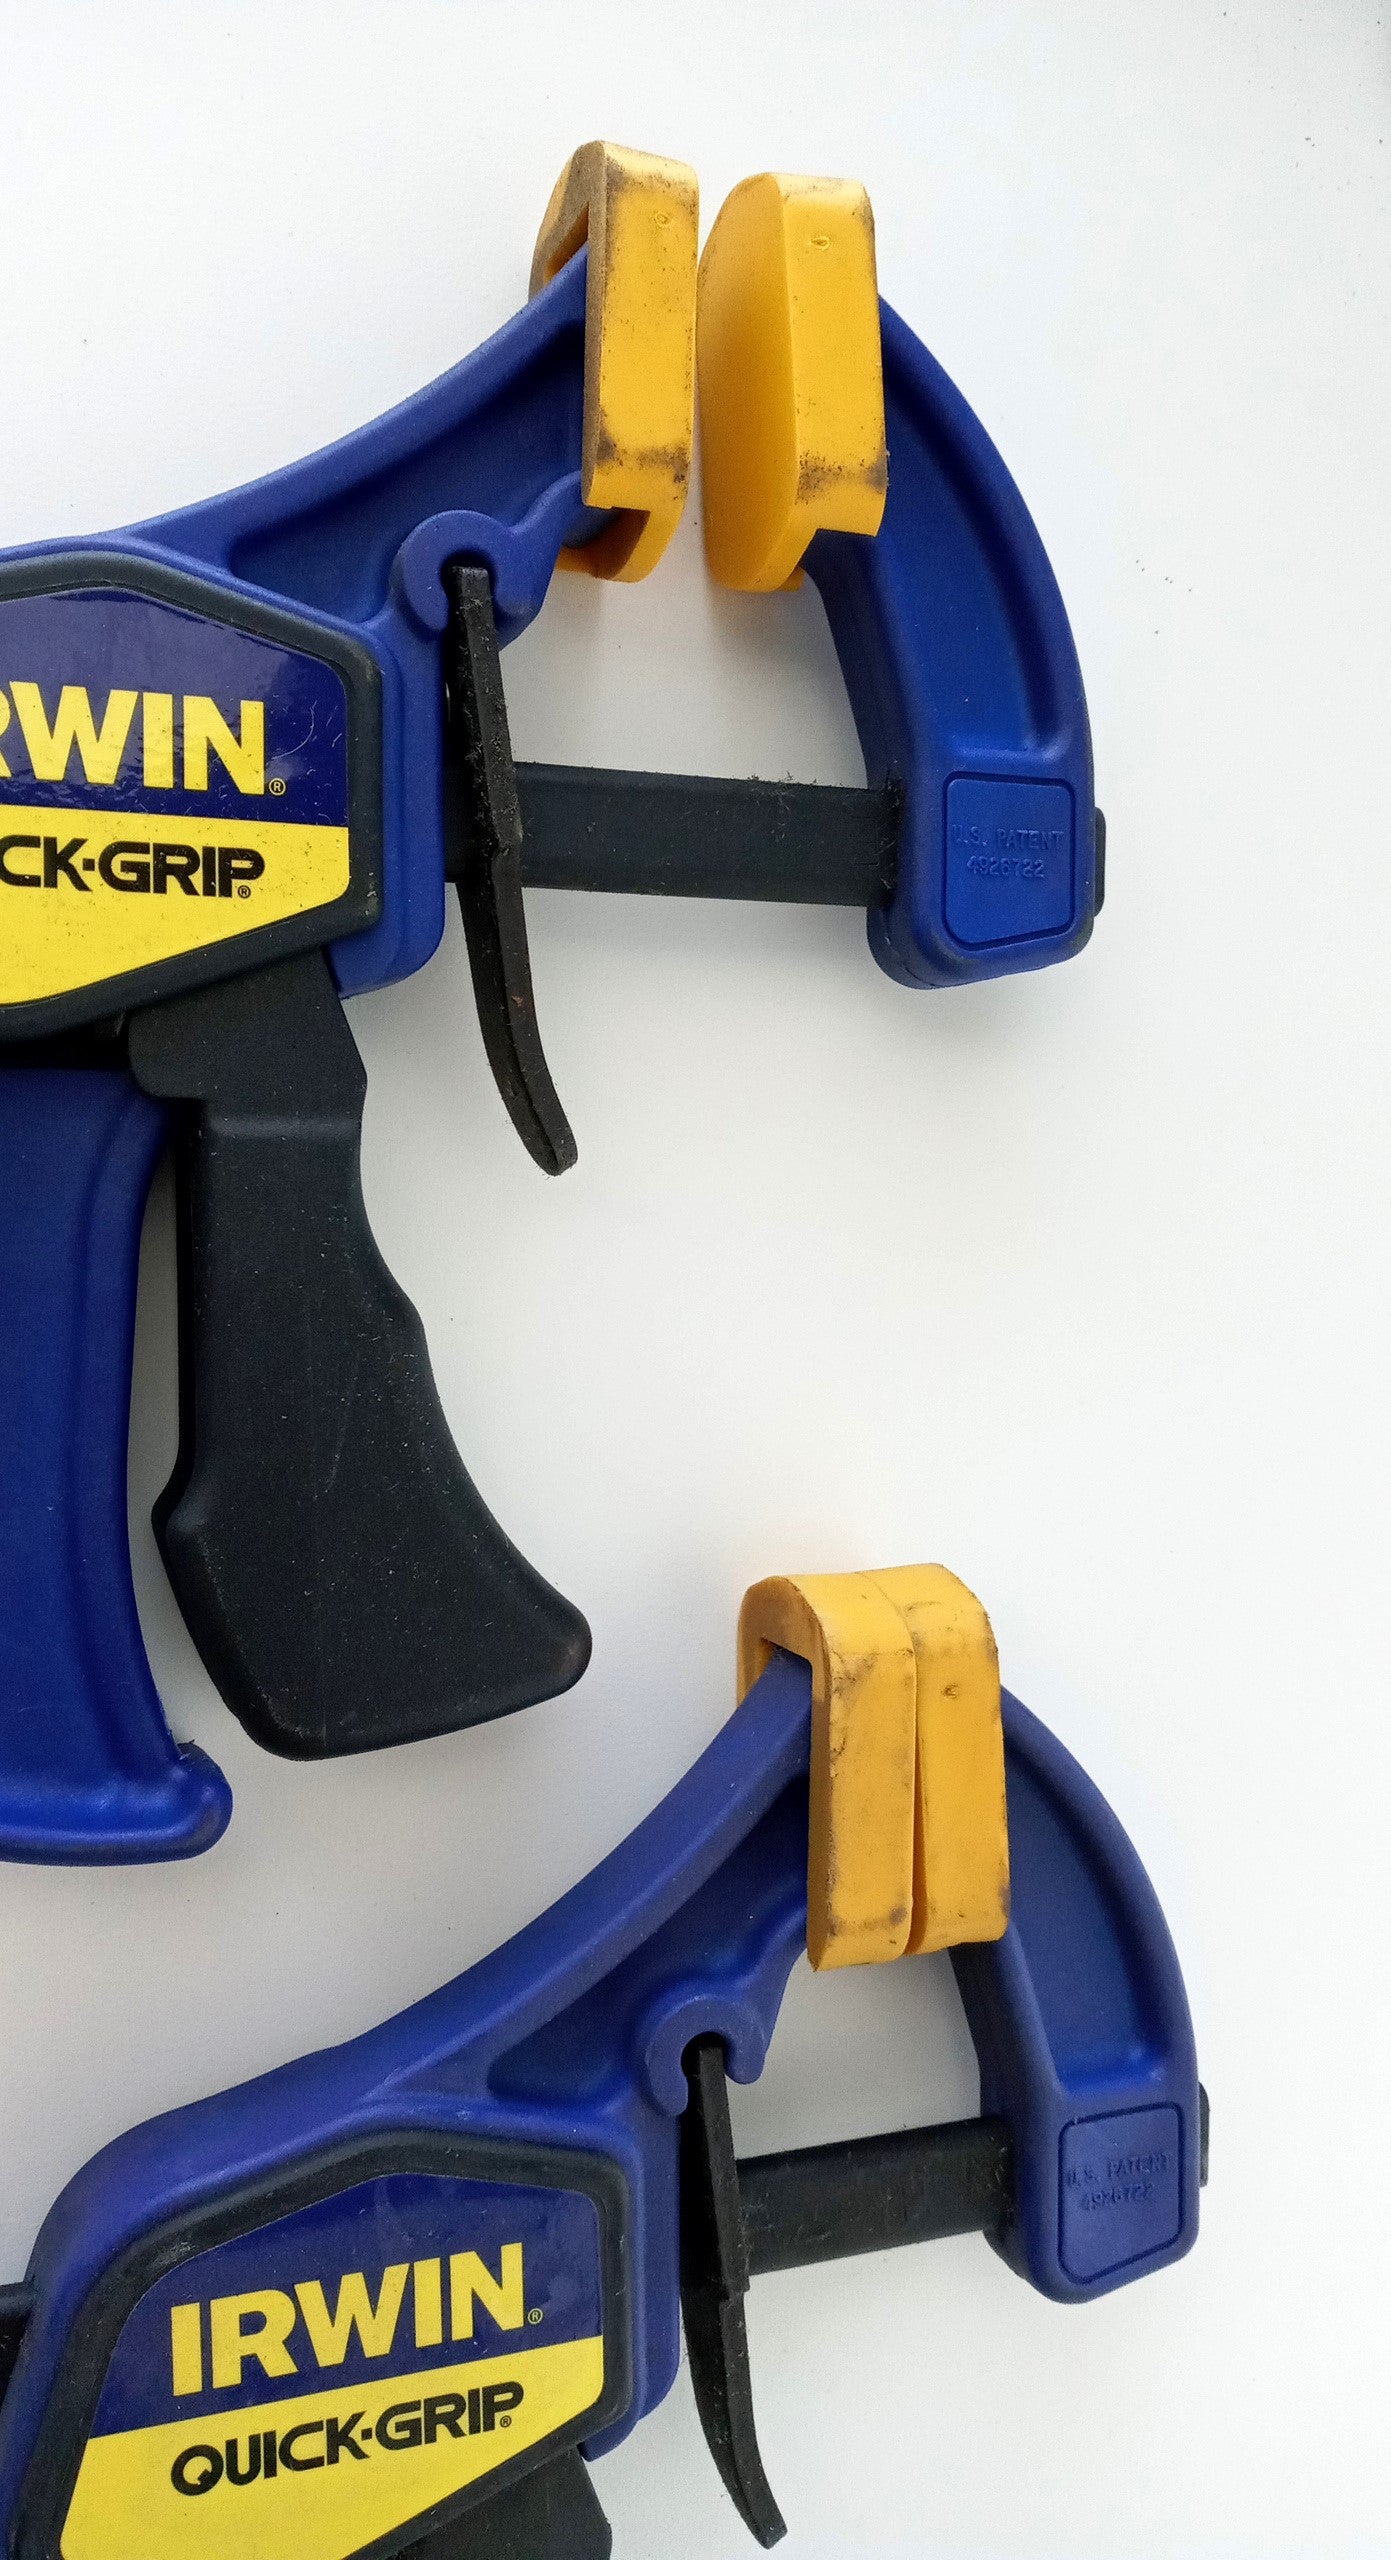 Irwin Tools 5464 6" Quick-Grip One-Handed Mini Bar Clamp, 4 Pack